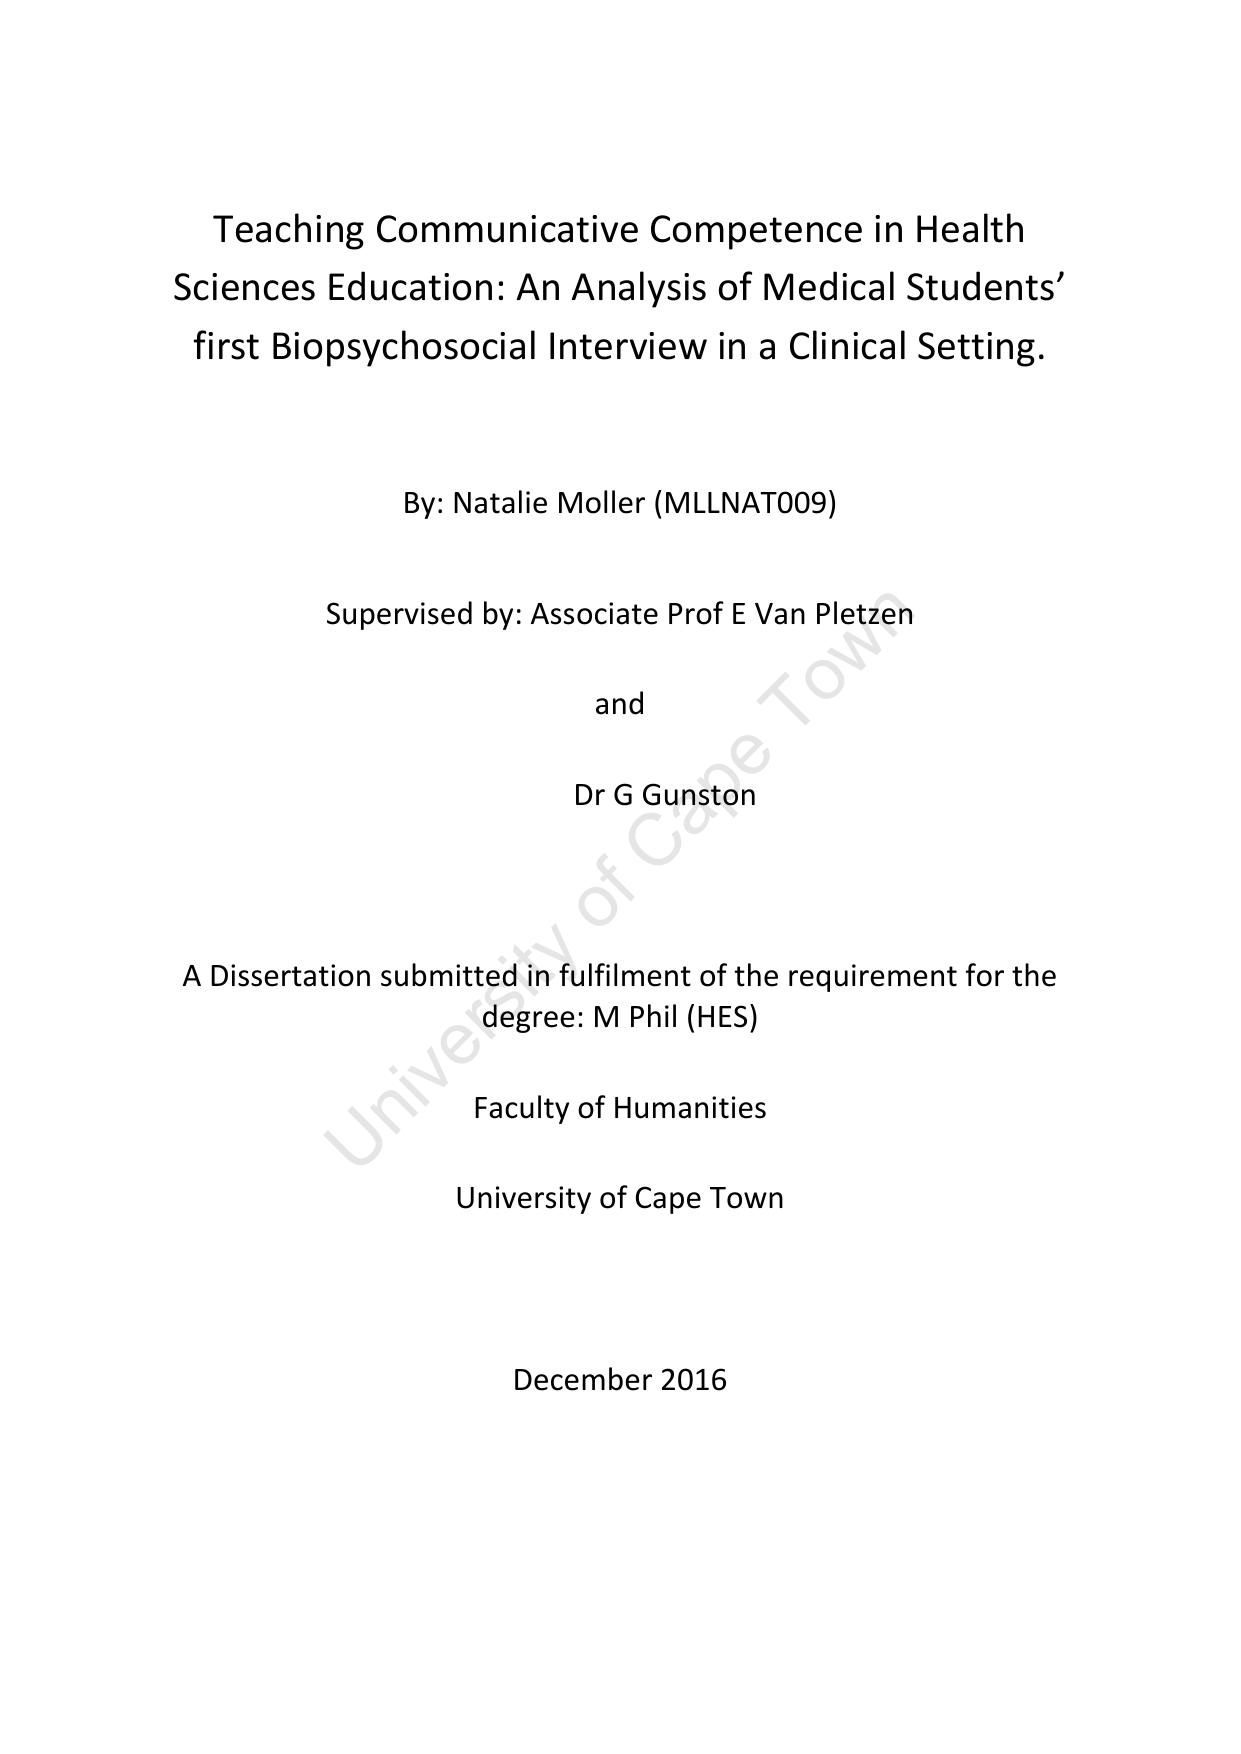 Teaching Communicative Competence in Health Sciences Education: An analysis of medical Students' First Biopsychosocial Interview in a Clinical Setting